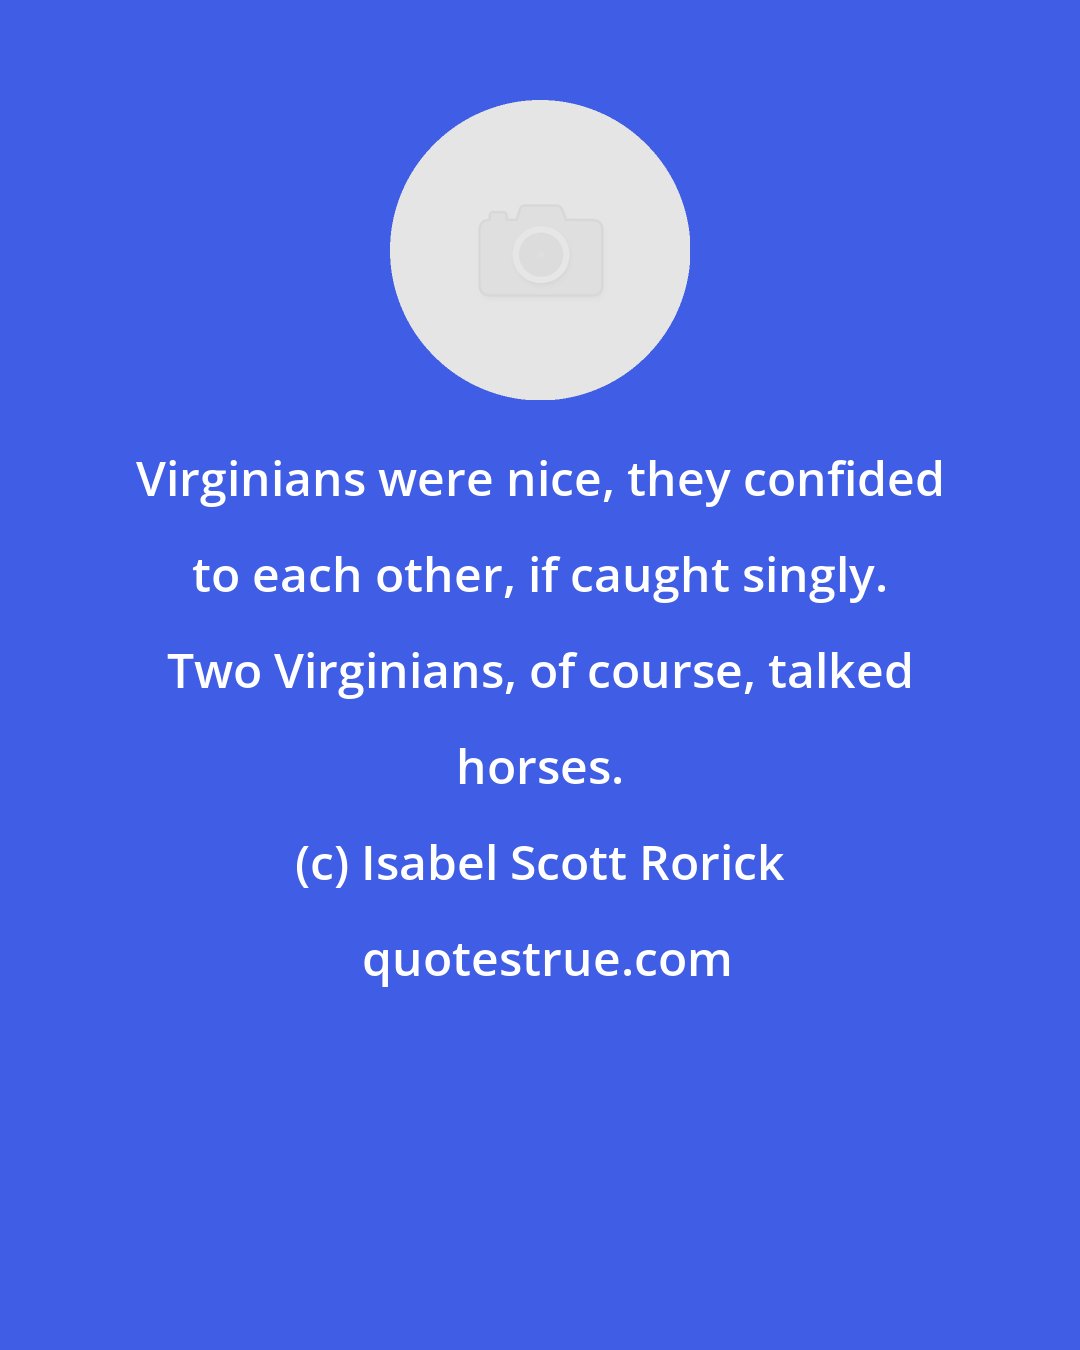 Isabel Scott Rorick: Virginians were nice, they confided to each other, if caught singly. Two Virginians, of course, talked horses.